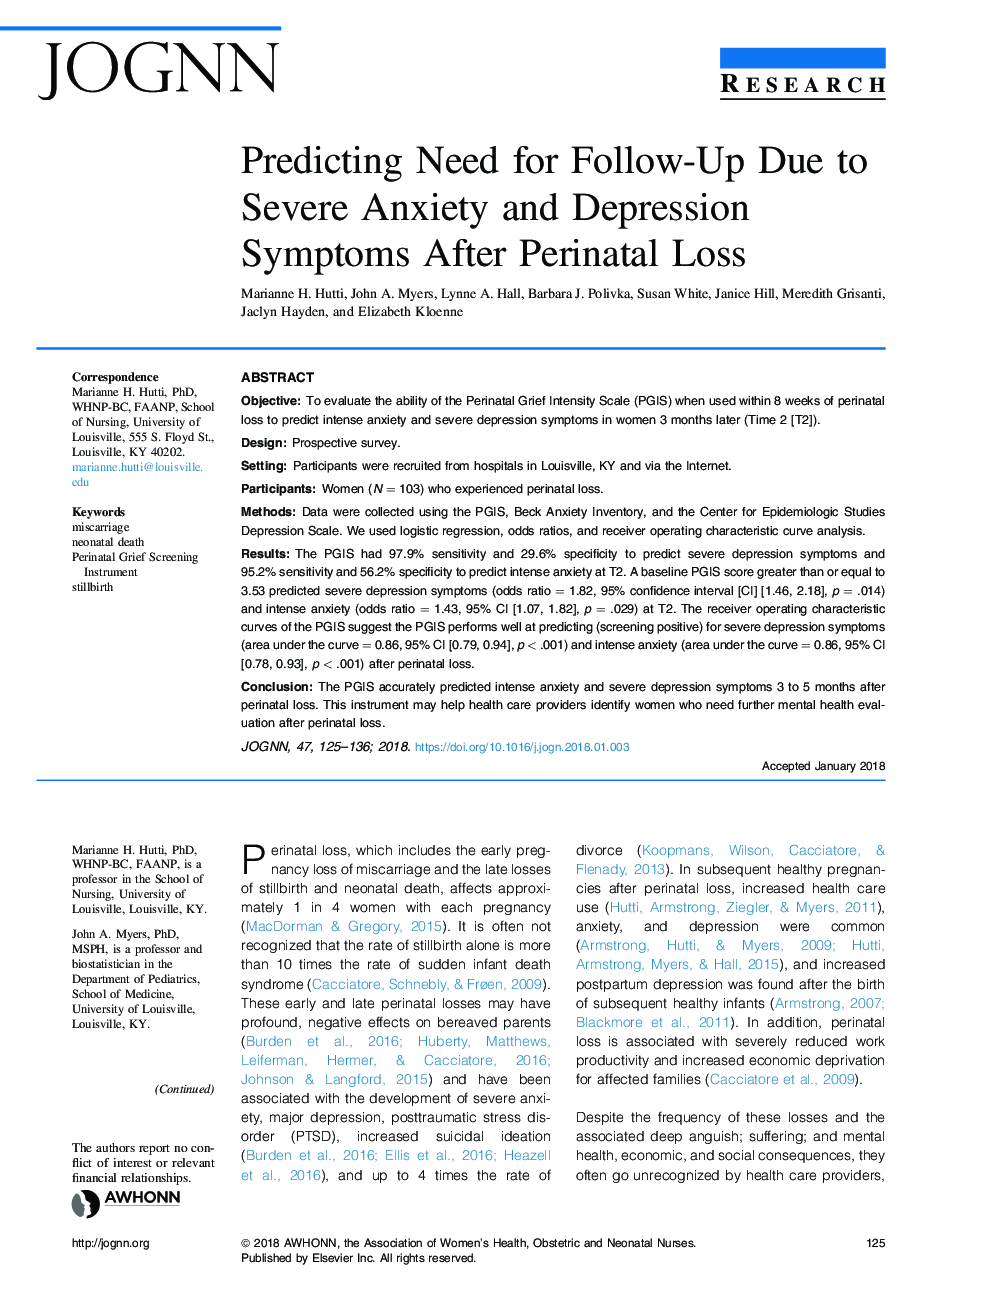 Predicting Need for Follow-Up Due to Severe Anxiety and Depression Symptoms After Perinatal Loss